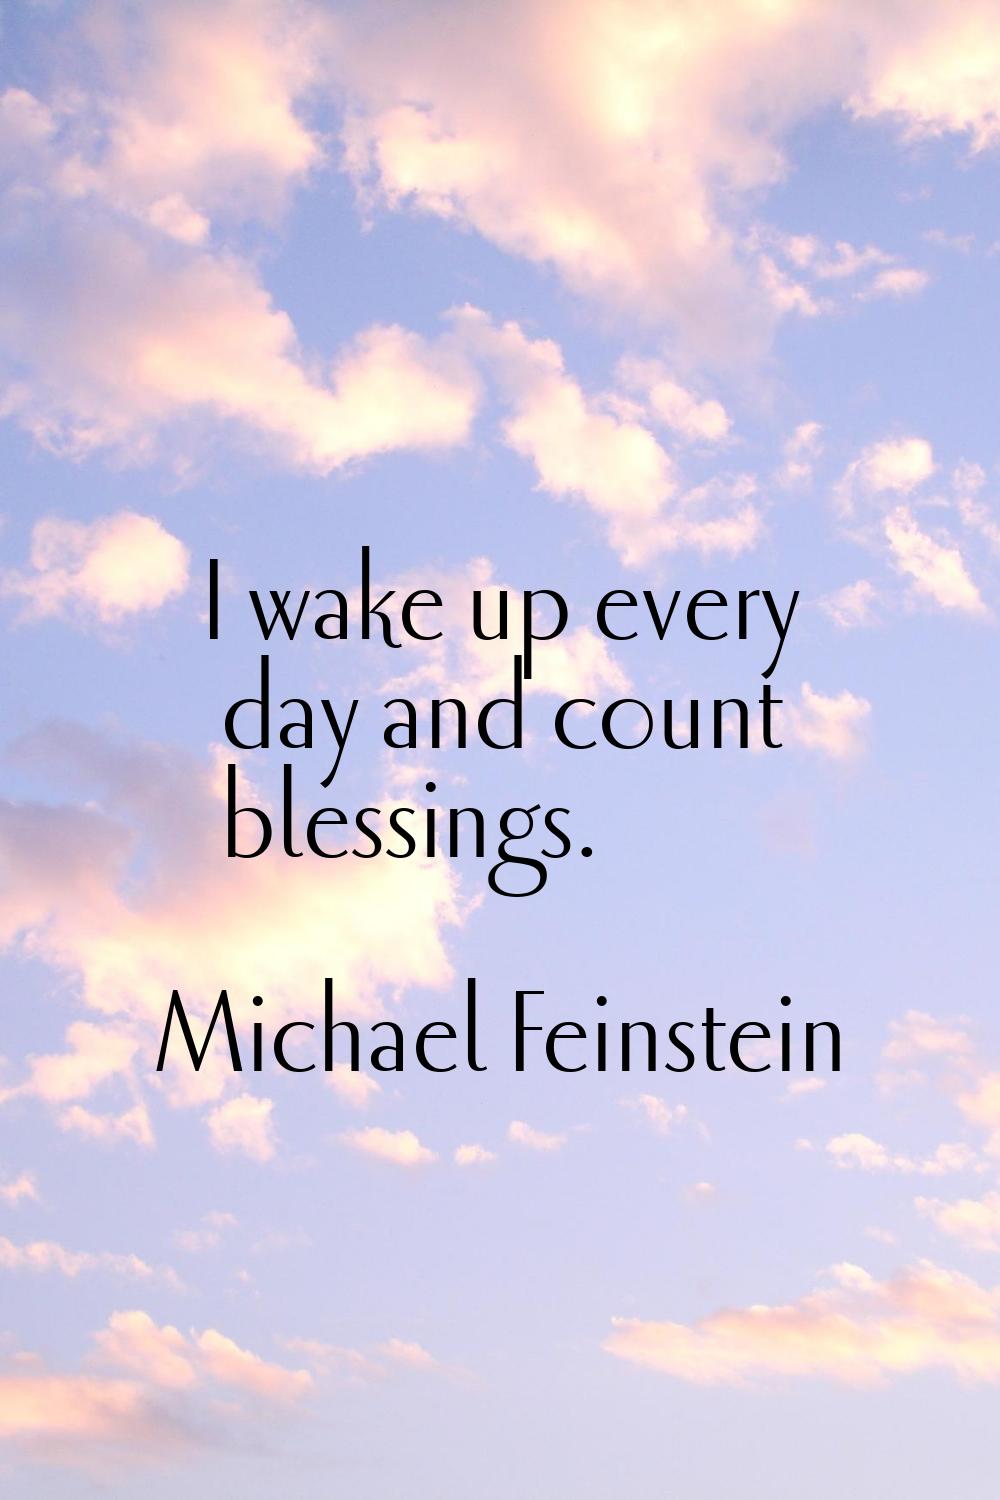 I wake up every day and count blessings.